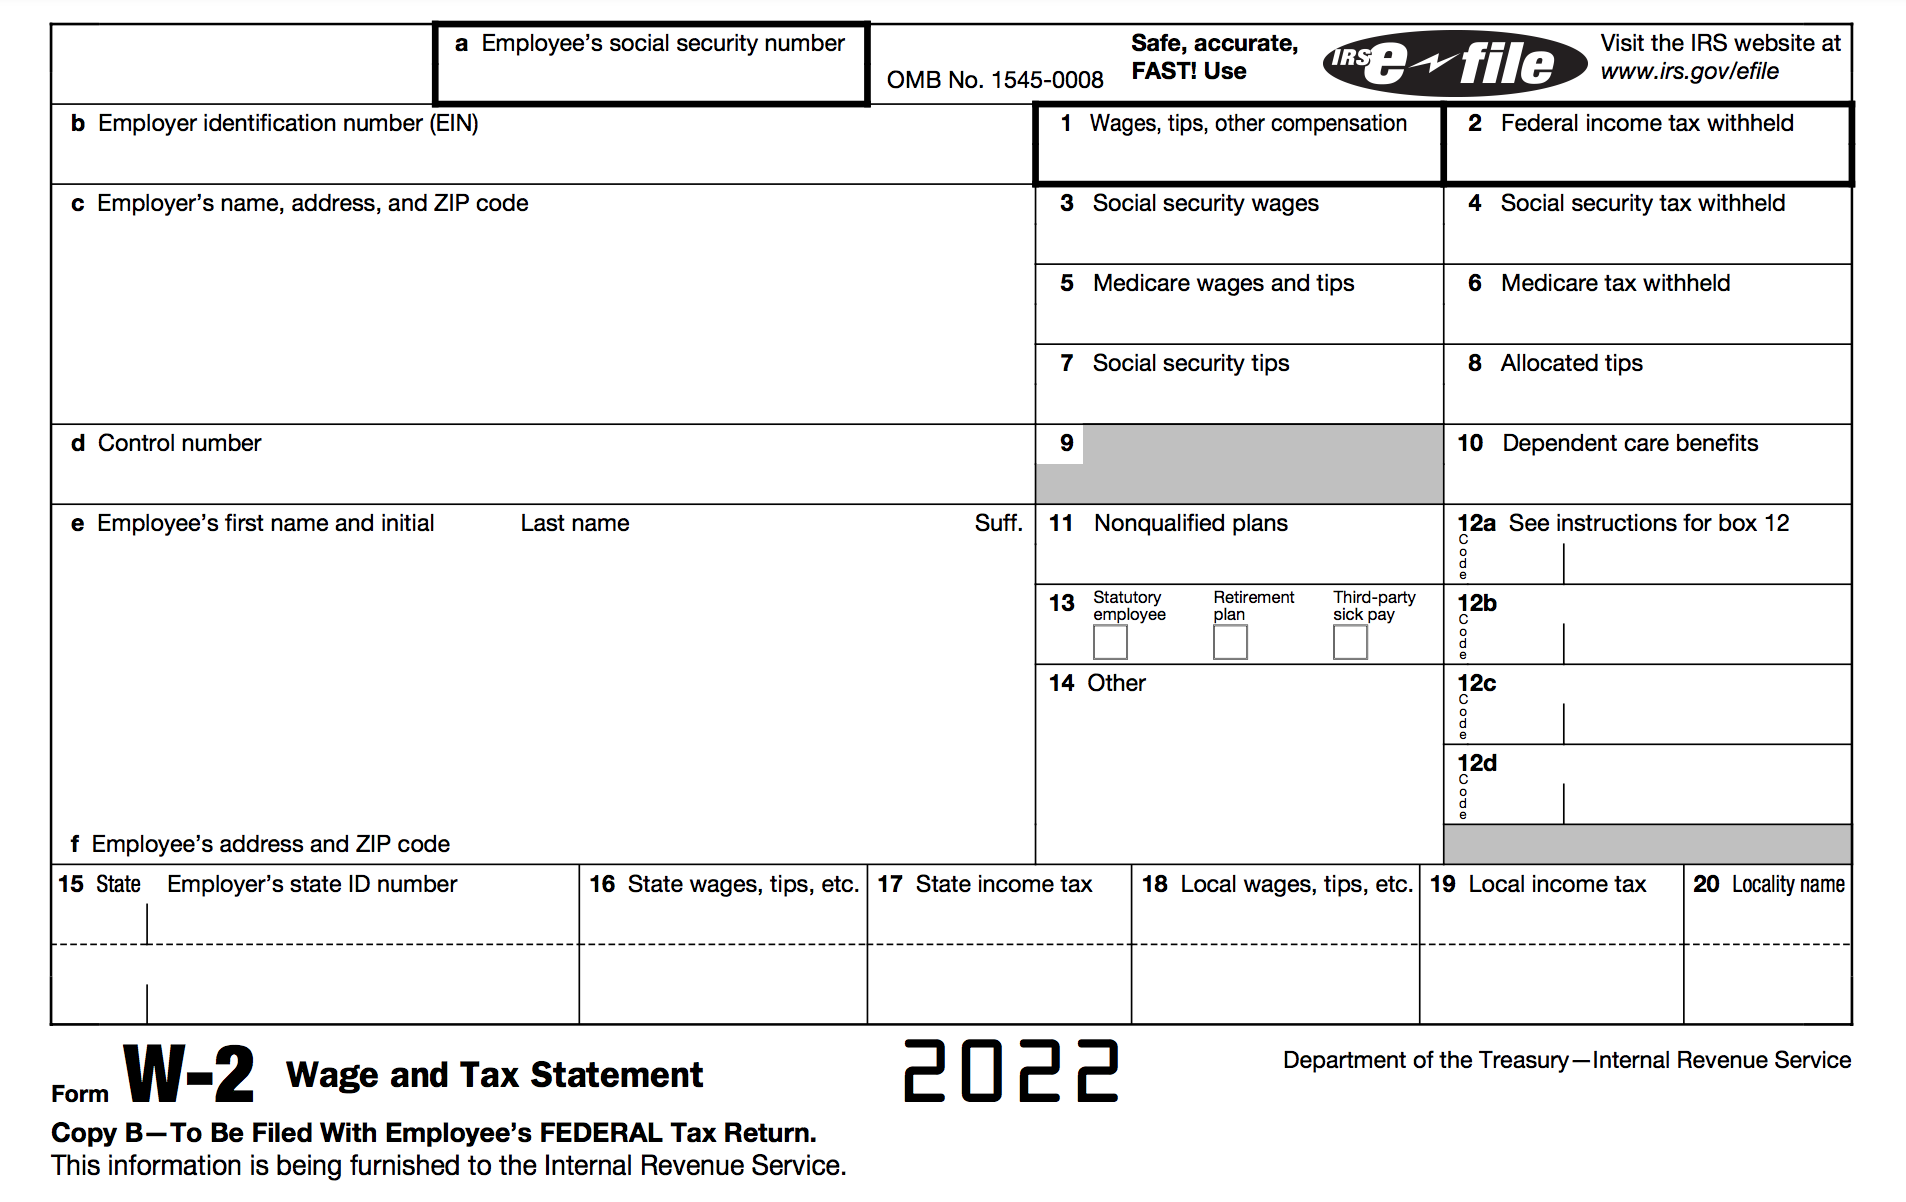 How To Fill Out A W-2 Tax Form | Smartasset pertaining to Fill Out W2 Form